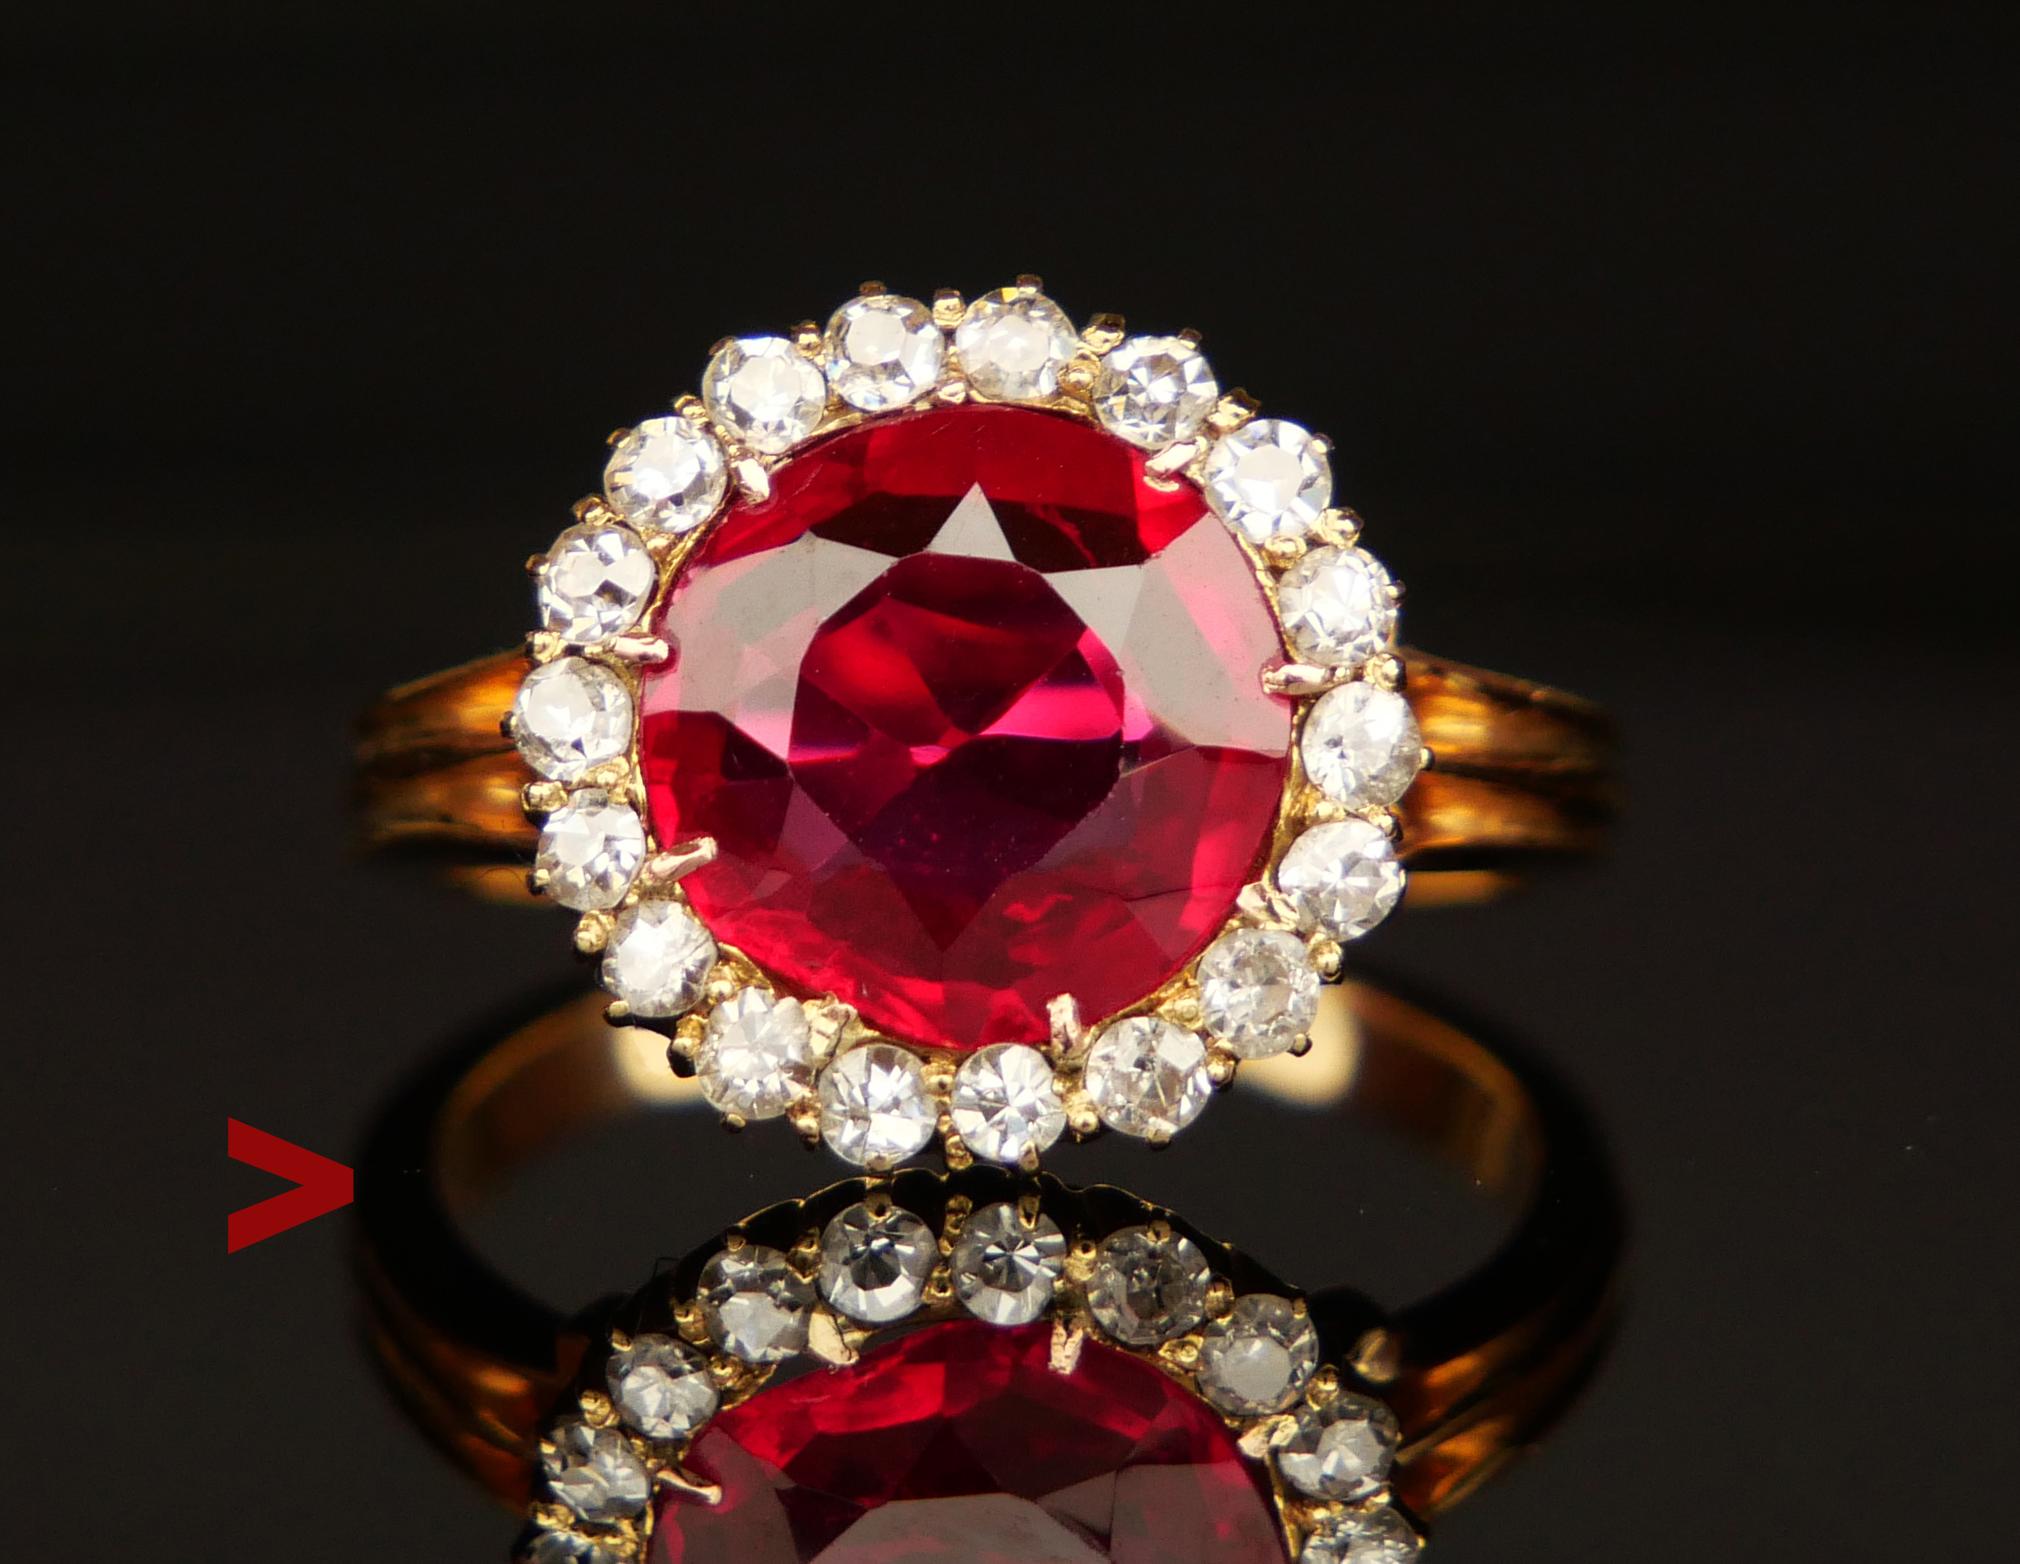 Halo Ring from ca .1920s -1930s with Ruby and 18 Diamonds. Not hallmarked, metal tested 14K.

Crown measures Ø 13 mm x 4.5 mm deep. Claw set Ruby is lab-made, old European cut 9.5 mm x 7.25 mm x 3.3mm / ca. 3.5 ct.

18 natural Diamonds of old